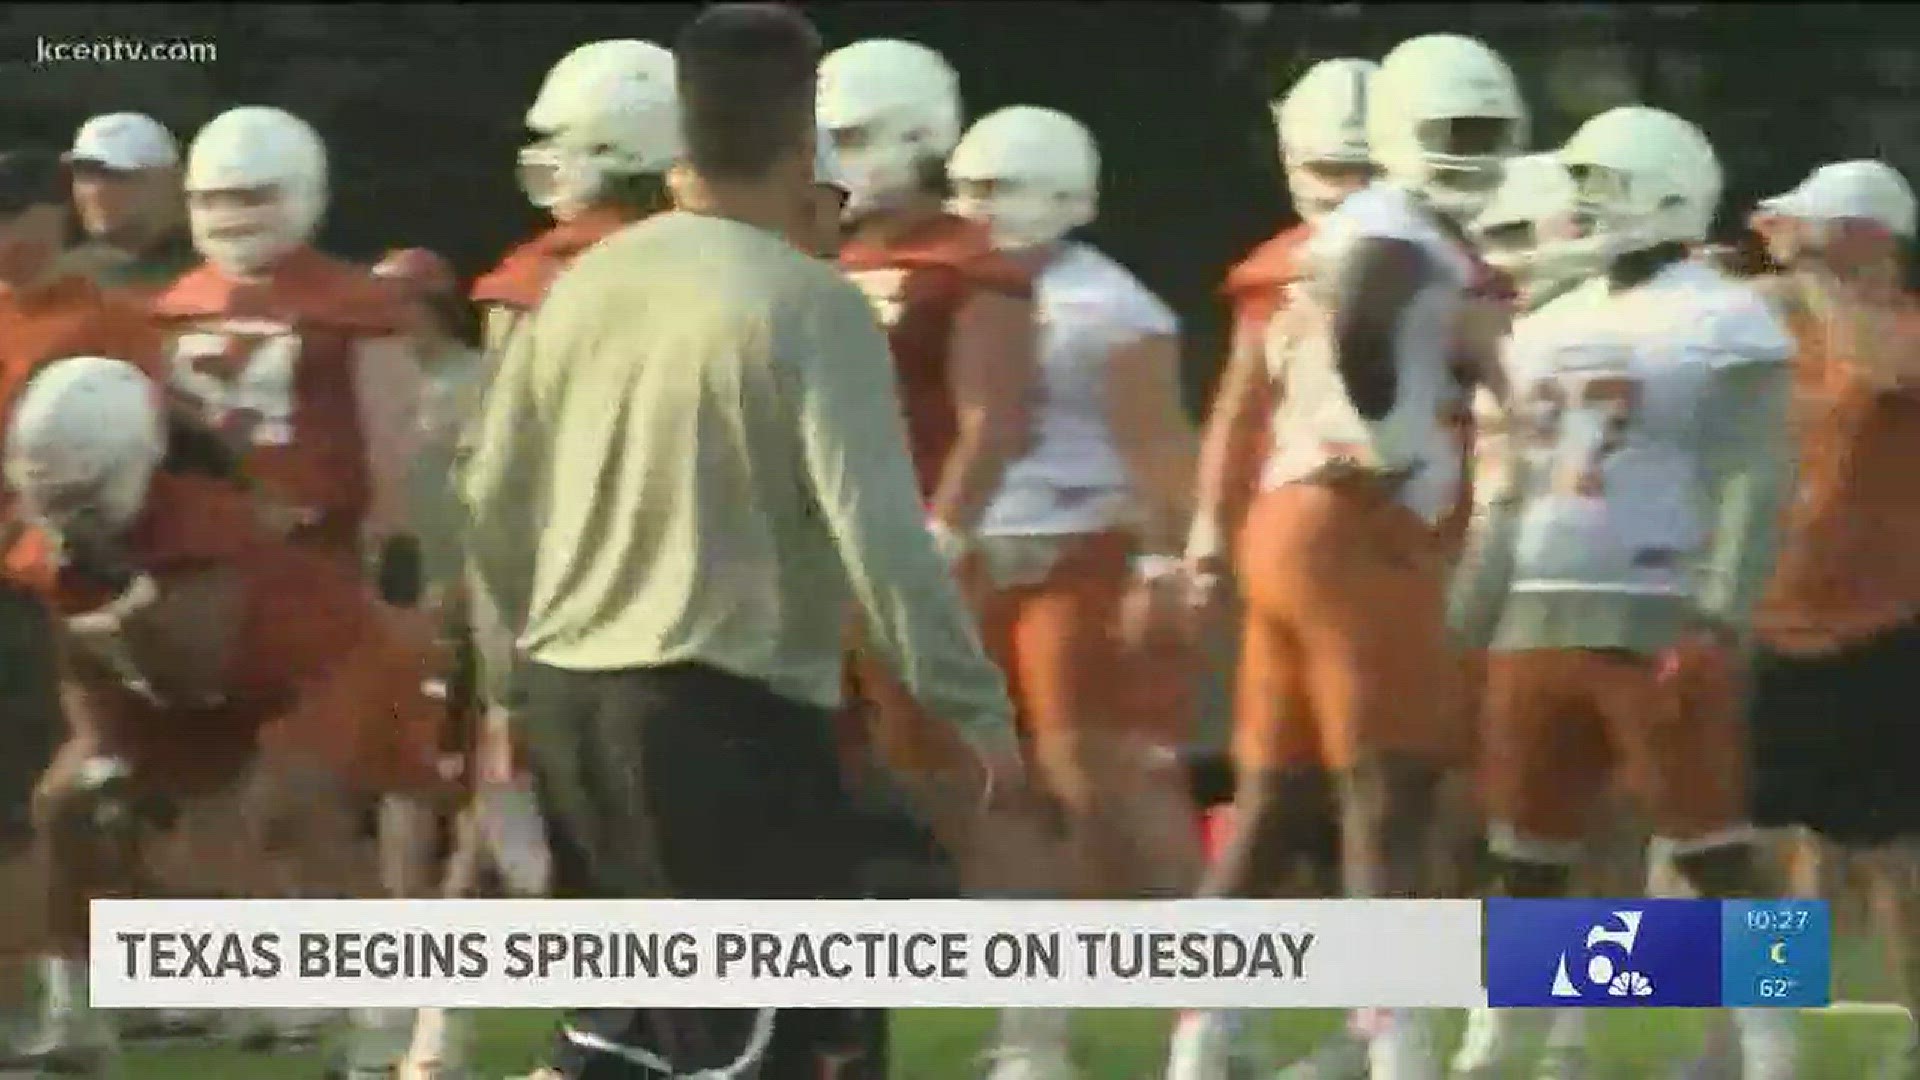 Texas had its first winning record since the 0213 season, they hope to build on last year's success when they open spring practice.